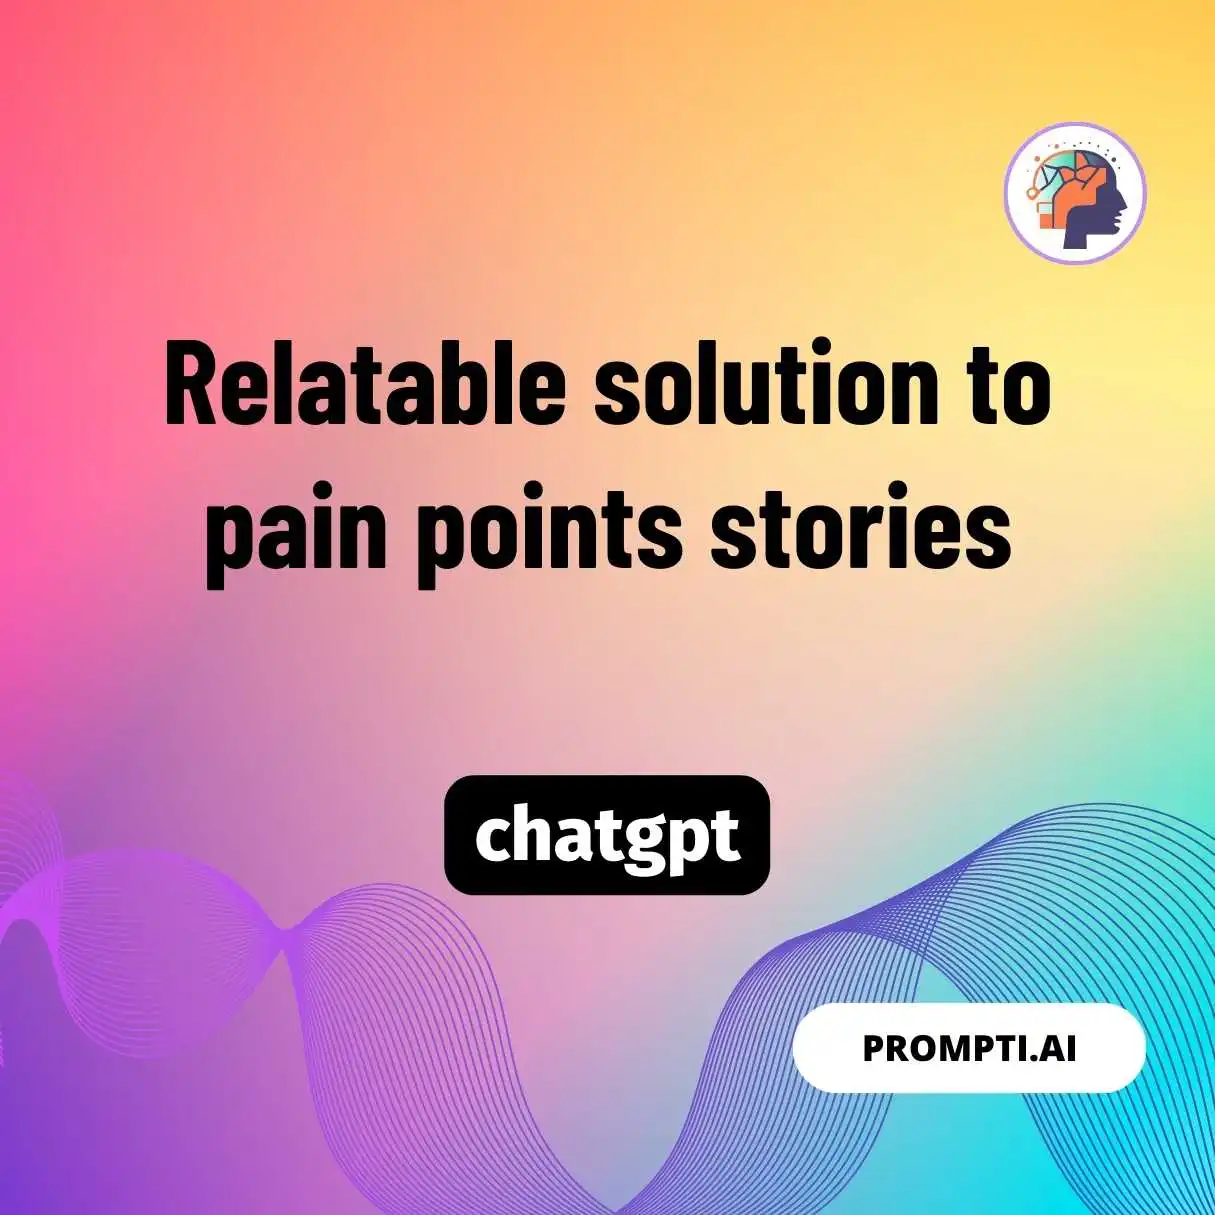 Relatable solution to pain points stories